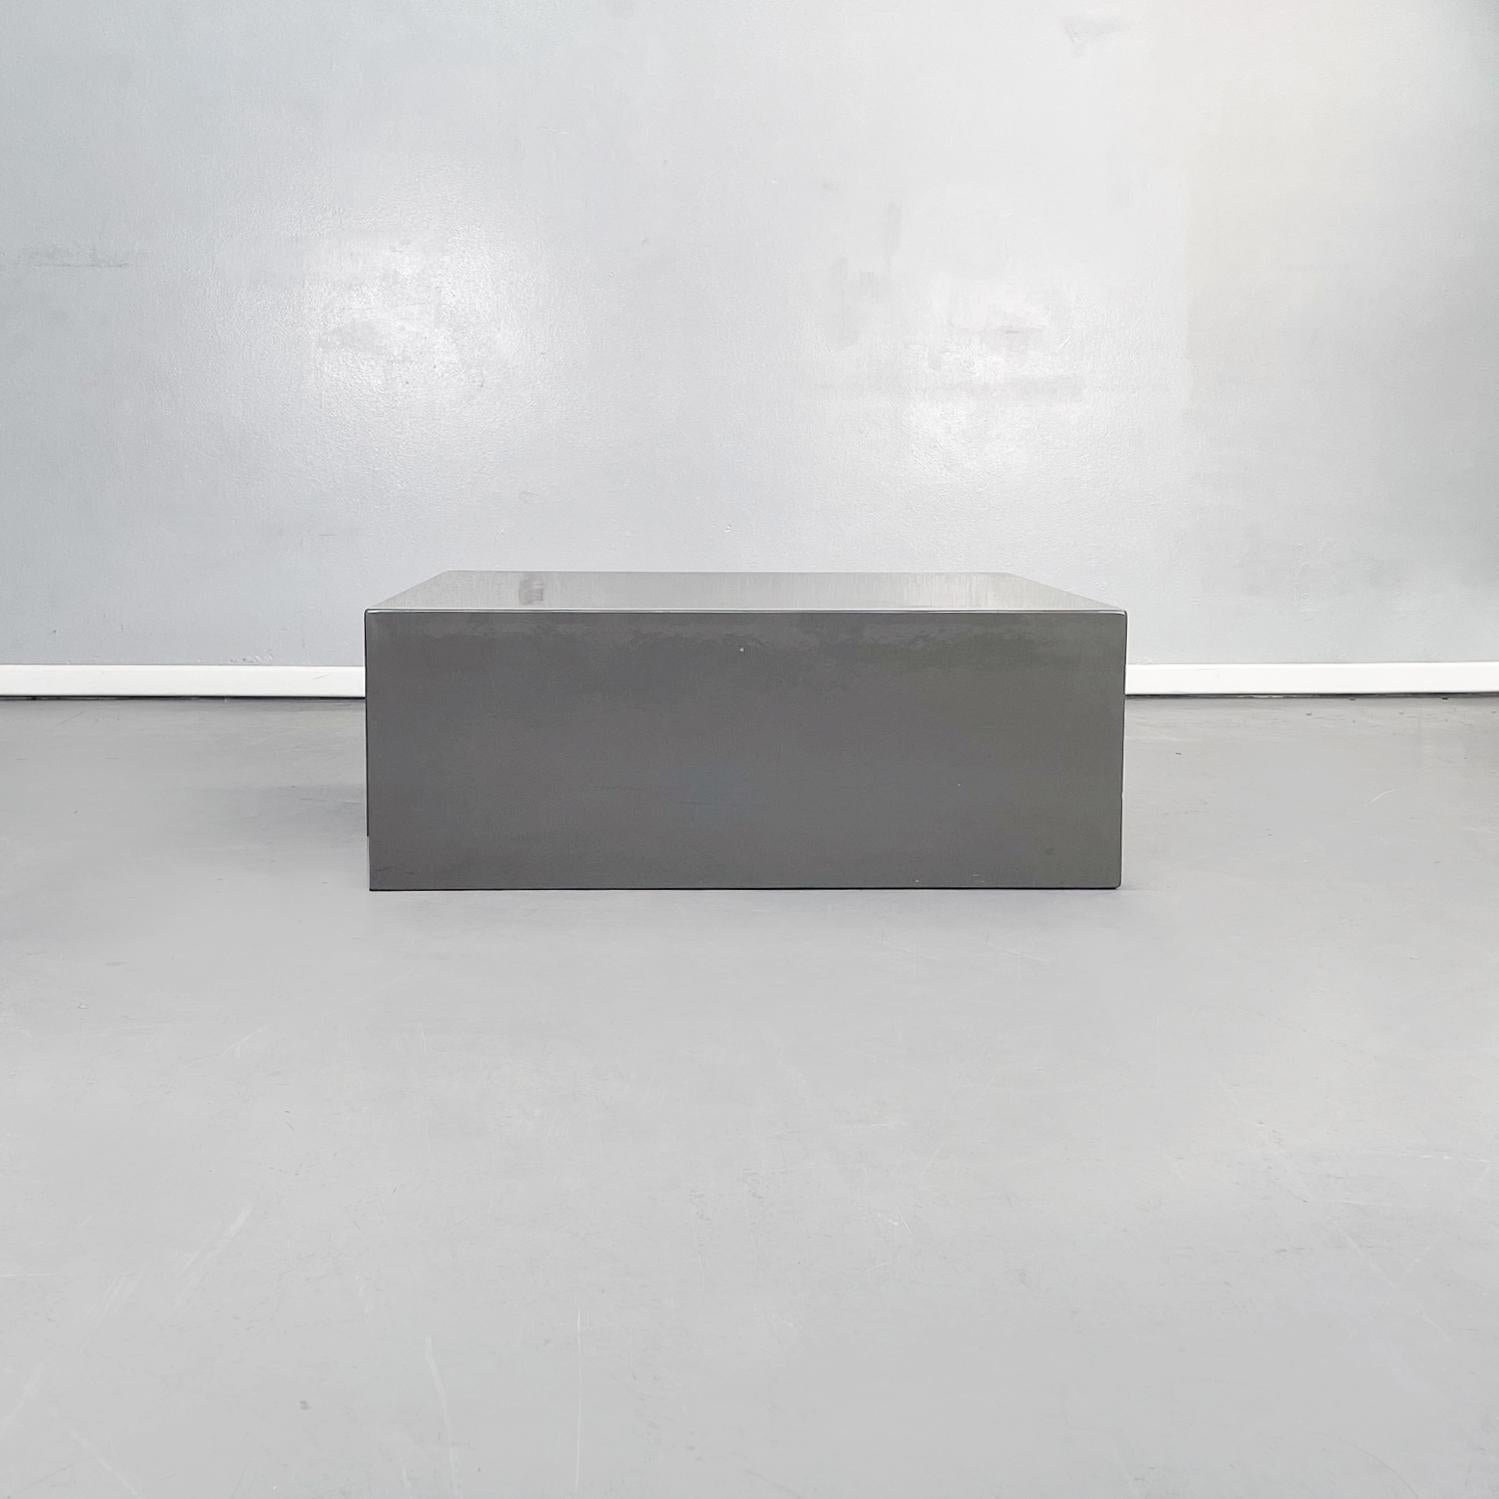 Italian mid-century grey wood coffee table by Caccia Dominioni for Azucena, 1960s
Coffee table in the shape of a parallelepiped with rounded corners, in gray lacquered wood.
Produced by Azucena in 1960s and designed by Luigi Caccia